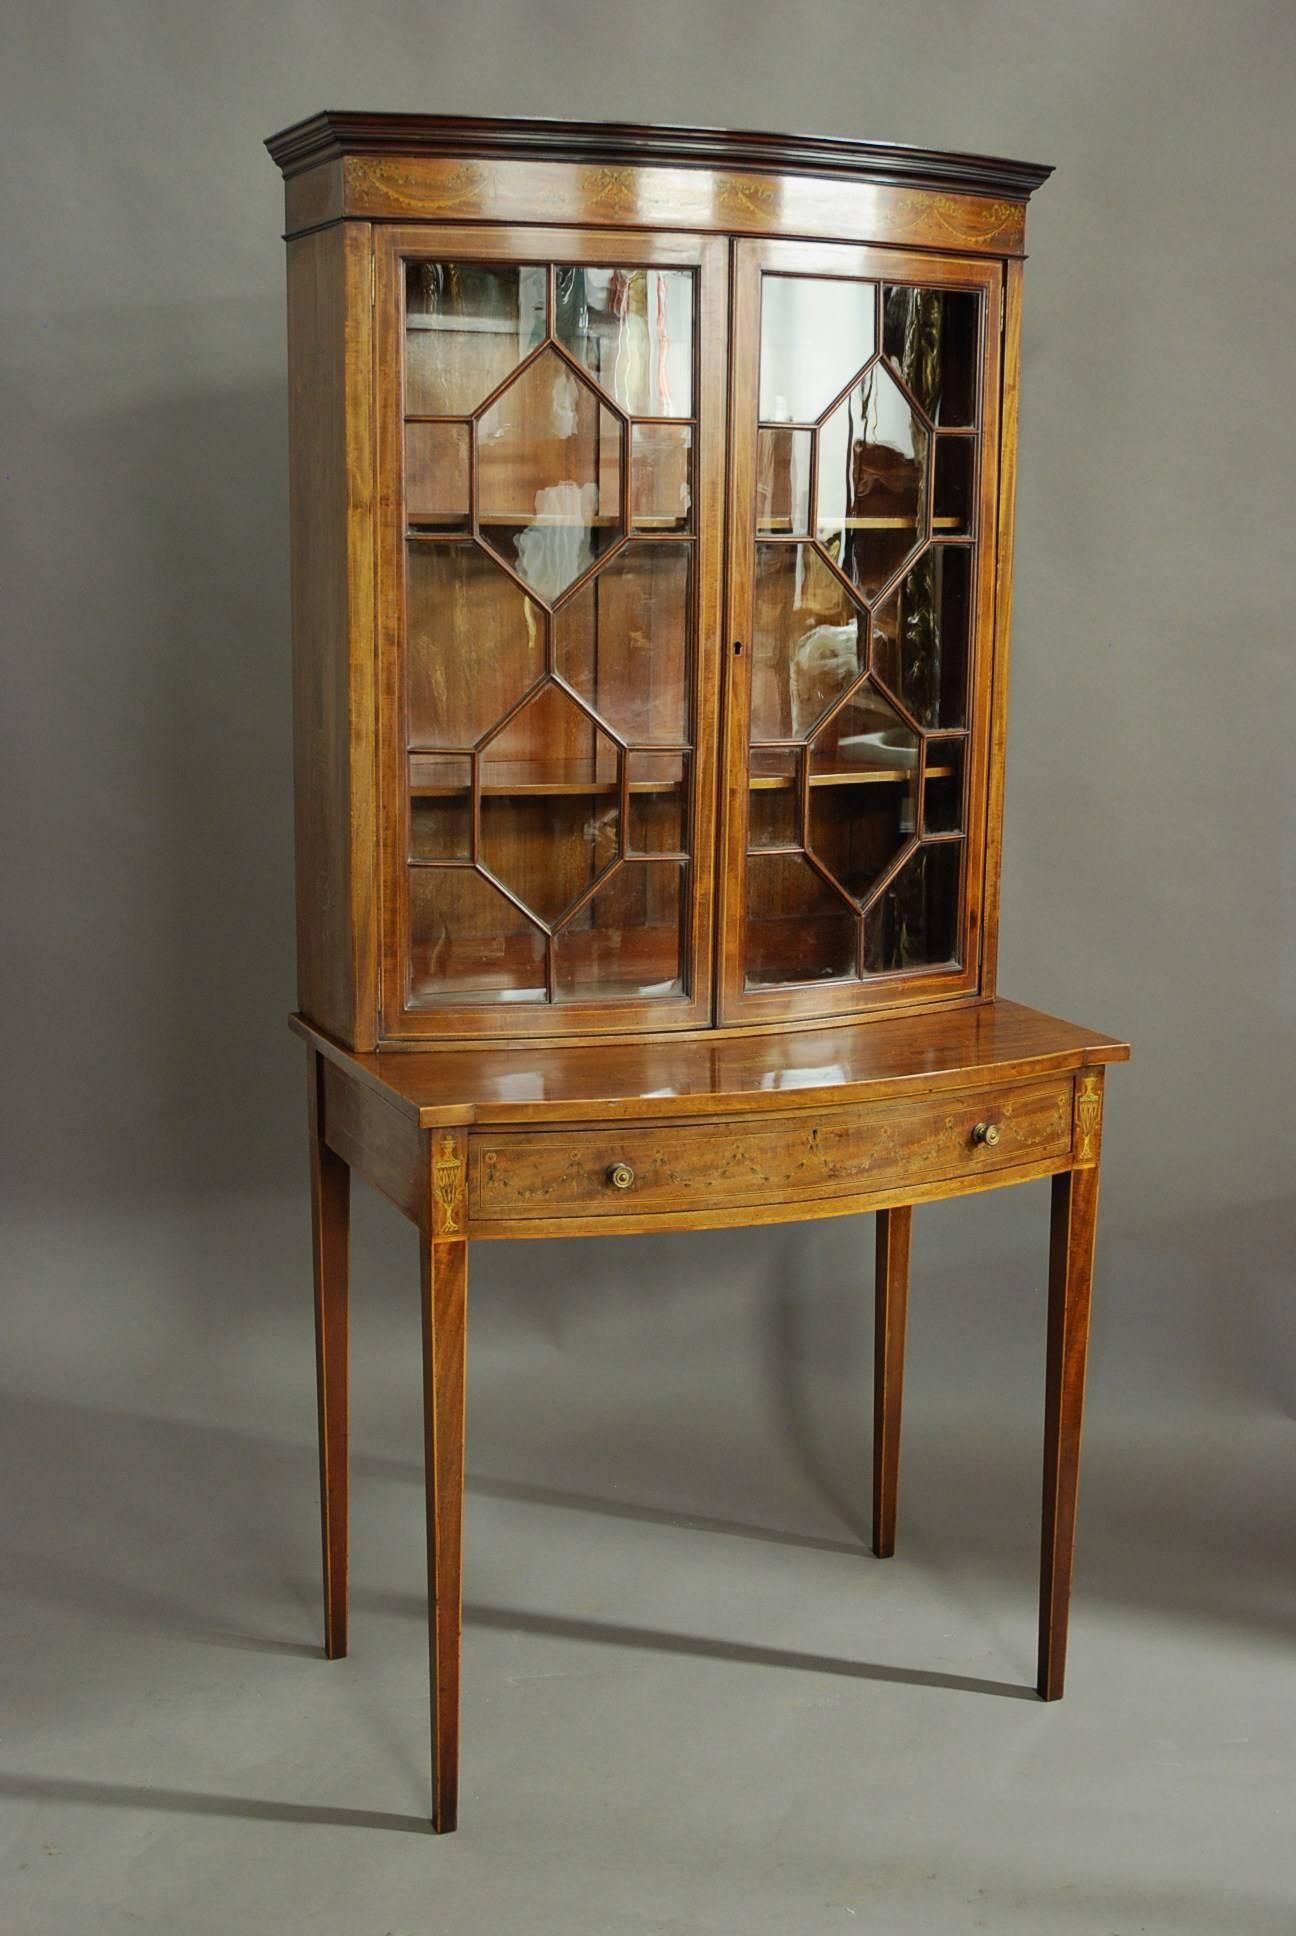 An Edwardian inlaid mahogany bow front glazed display cabinet (or bookcase) in the manner of Edwards & Roberts.

The cabinet consists of a moulding to the top with a frieze below of fine quality inlaid ribbon and swag decoration.  

This leads